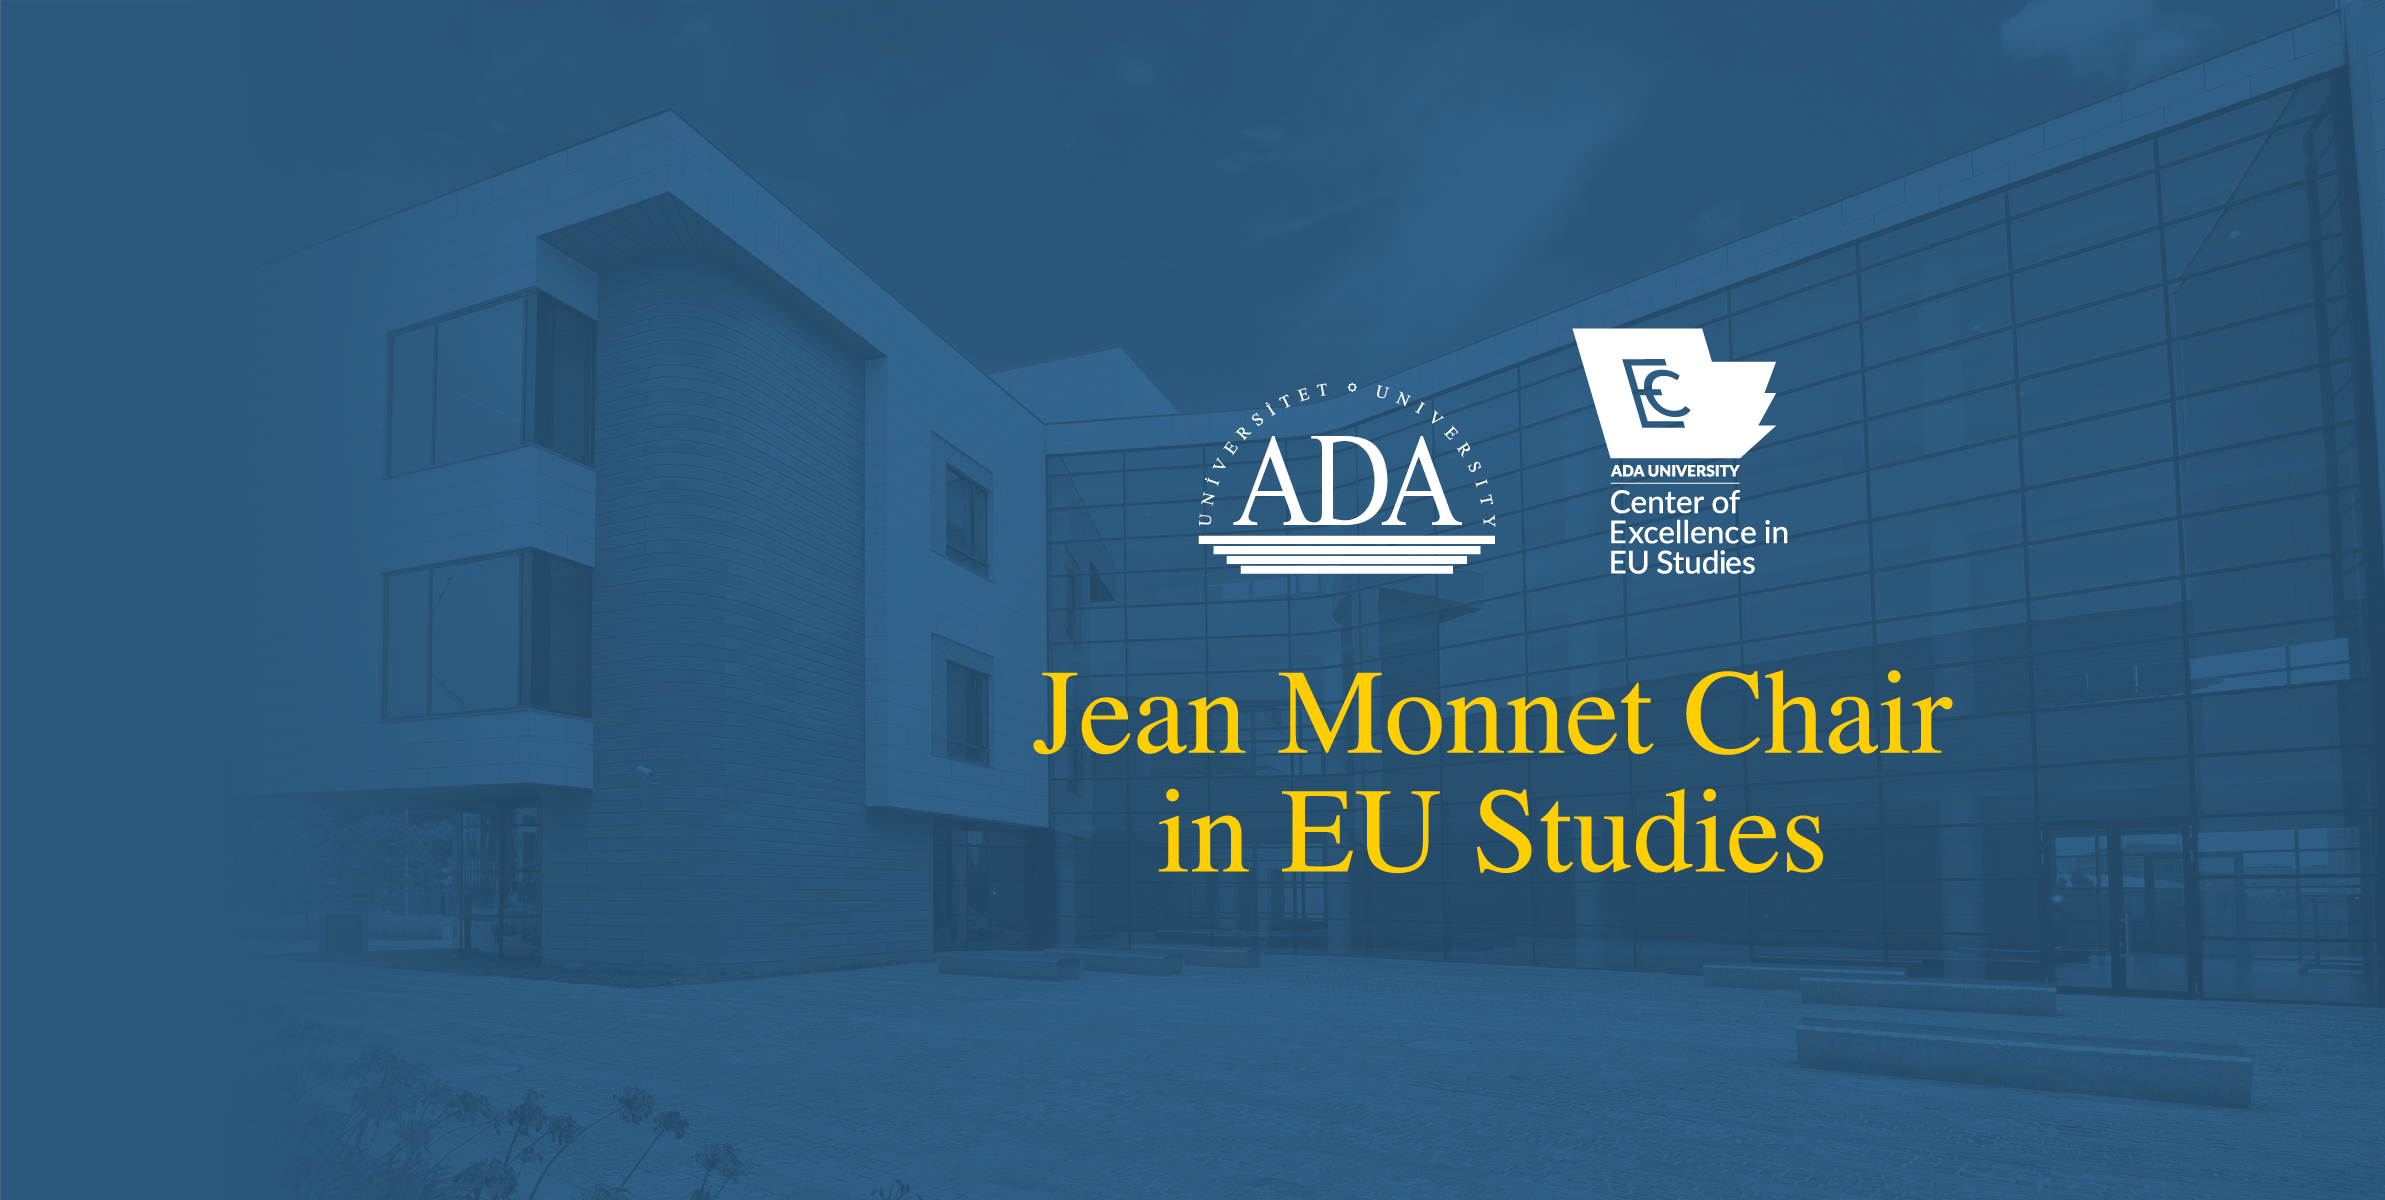 Dr. Anar Valiyev, Dean of School of Public and International Affairs, appointed Jean Monnet Chair